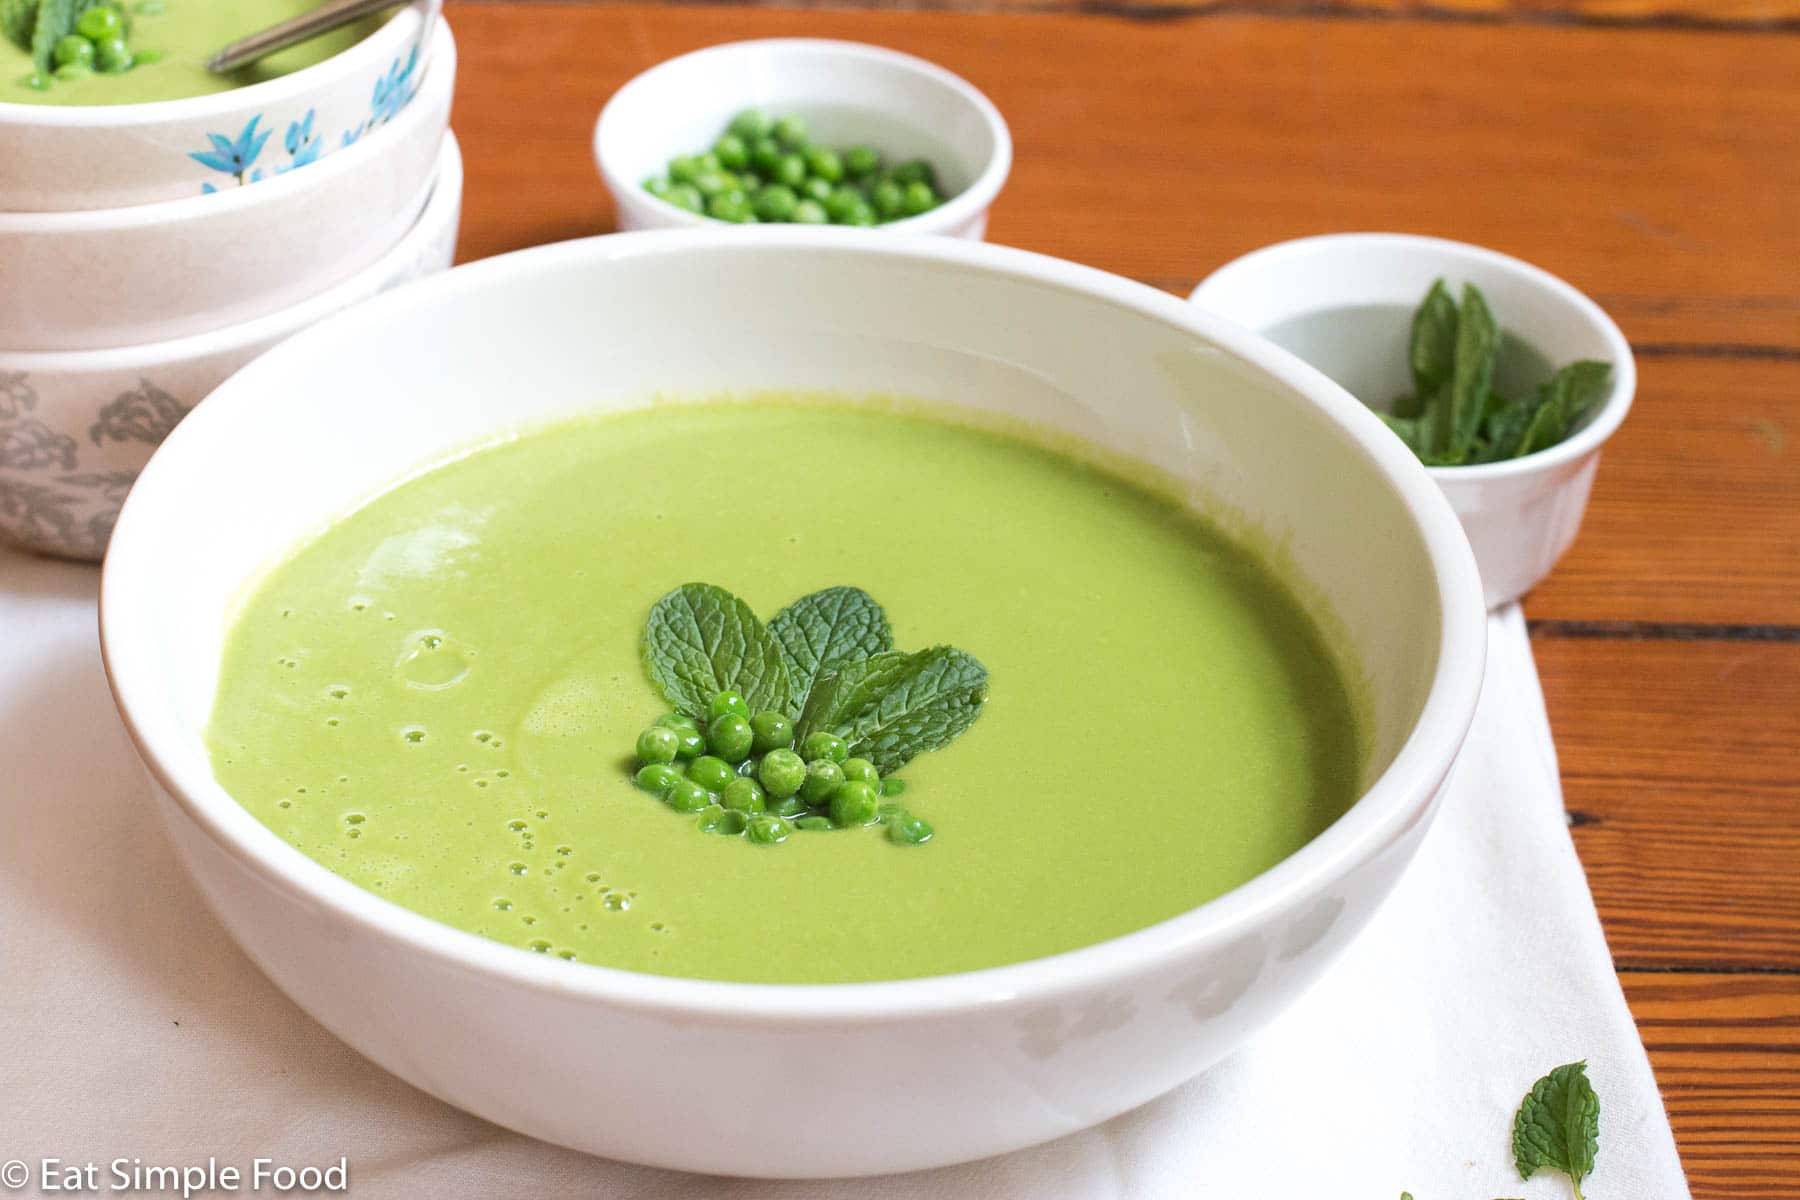 Large white bowl of green creamy soup garnished with fresh peas and mint leaves. Small bowl of peas and 3 bowls in background.